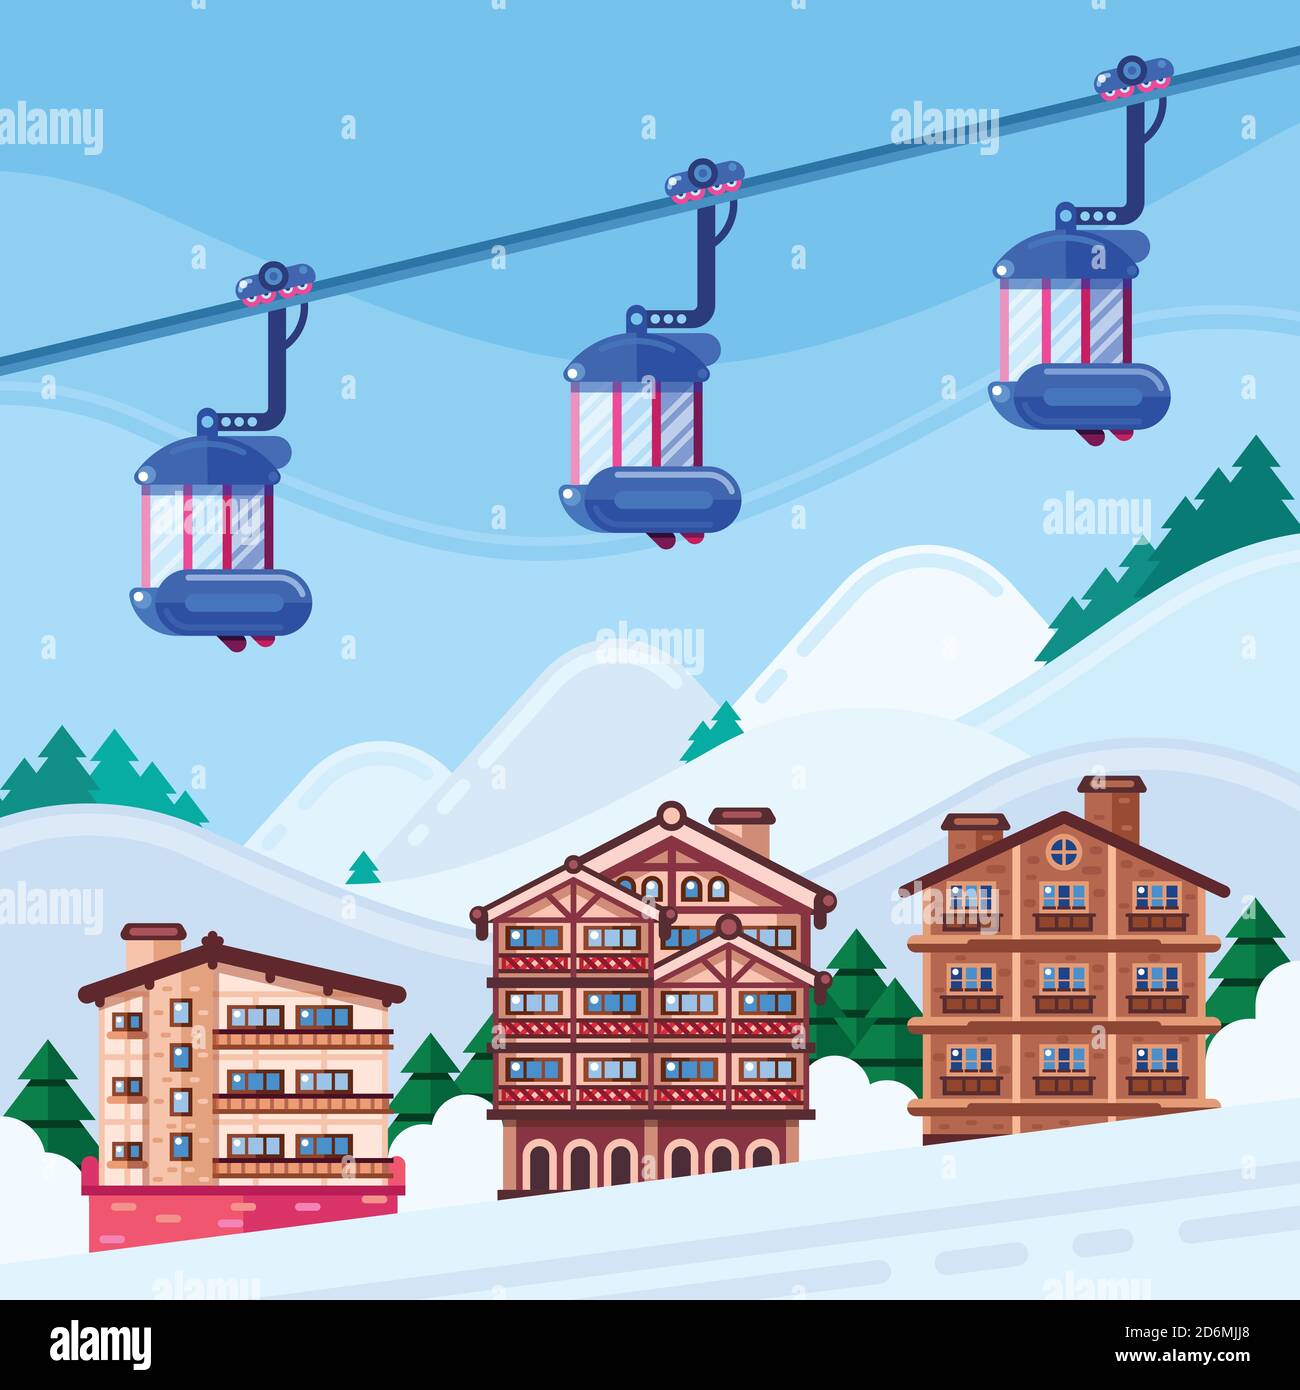 Winter ski resort vector illustration. Wooden hotels houses, snow mountains landscape and funicular cabins. Winter holiday and vacation. Stock Vector